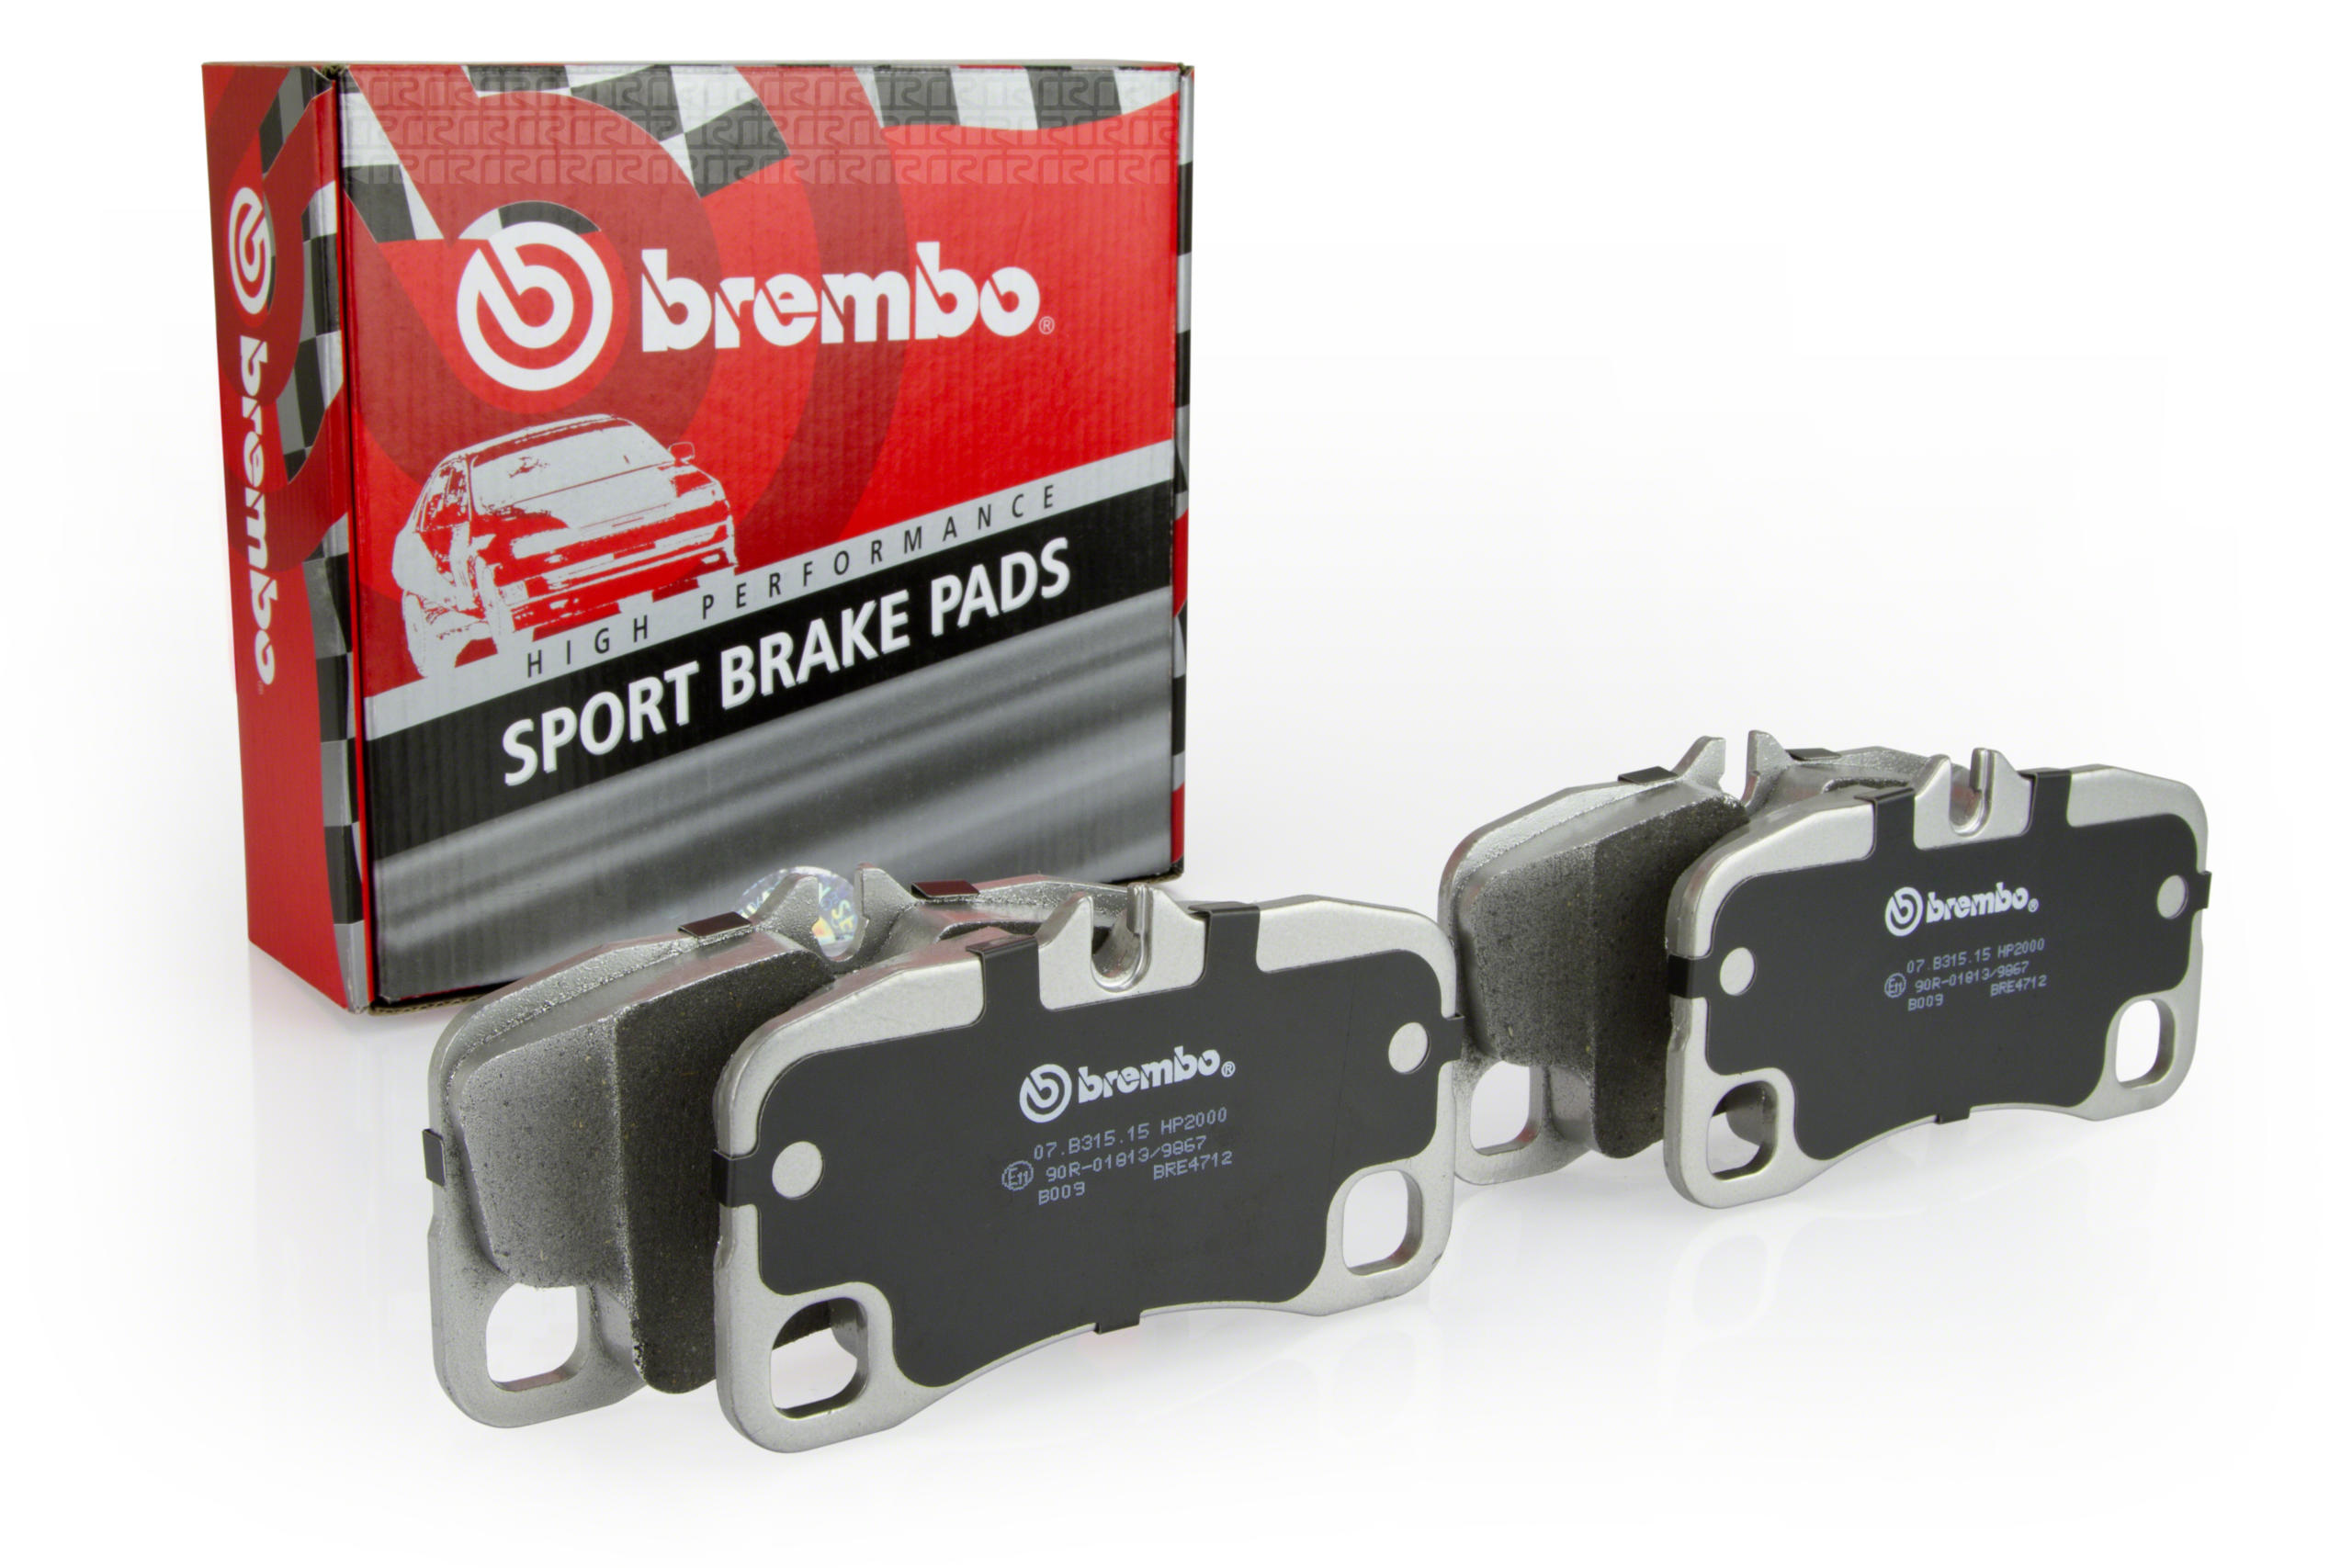 Latest Brembo calipers are a lesson in lightweight packaging